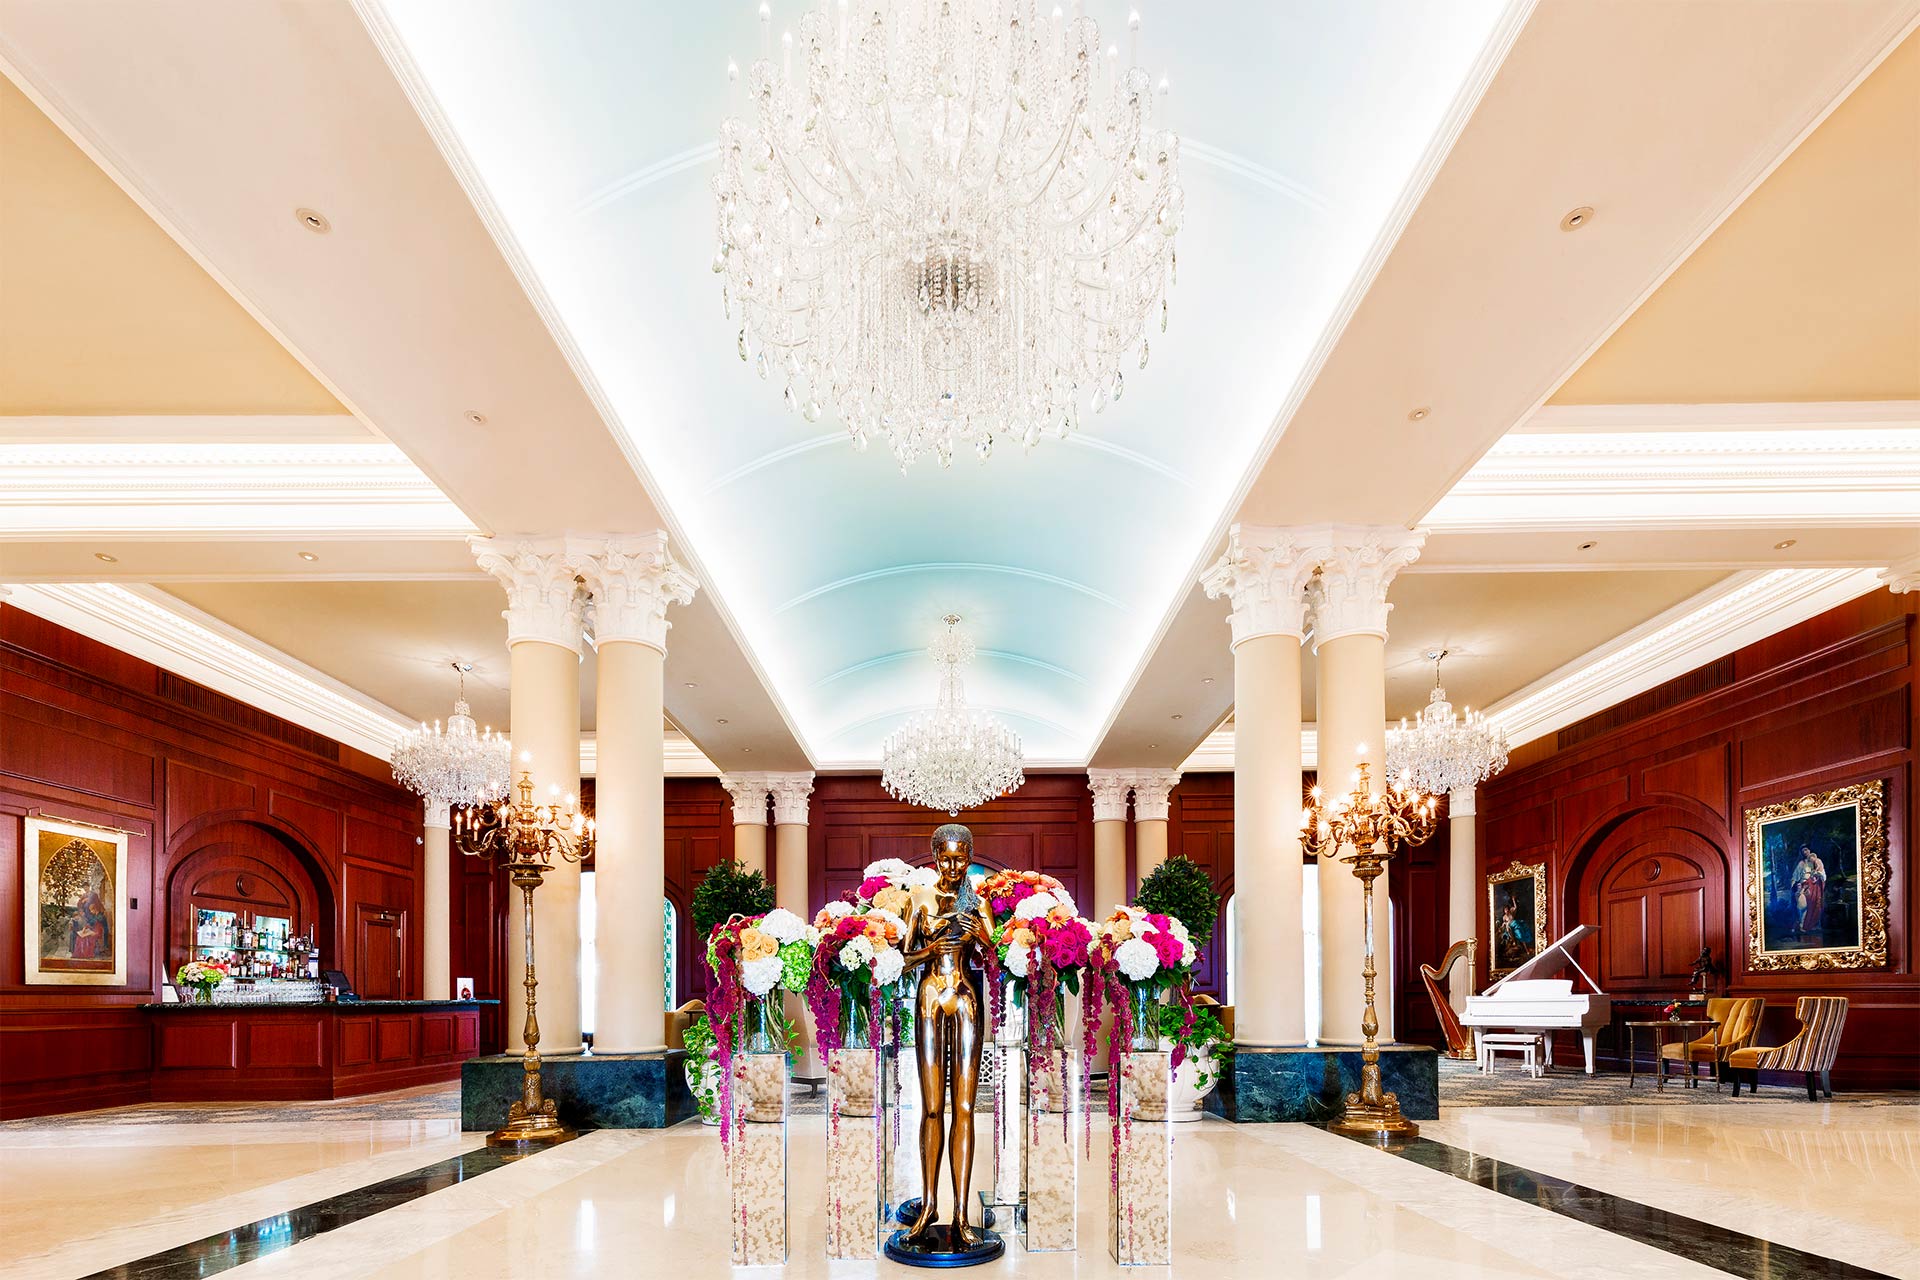 A fancy hotel lobby with a bronze statue of a woman in front and wooden walls and chandeliers above